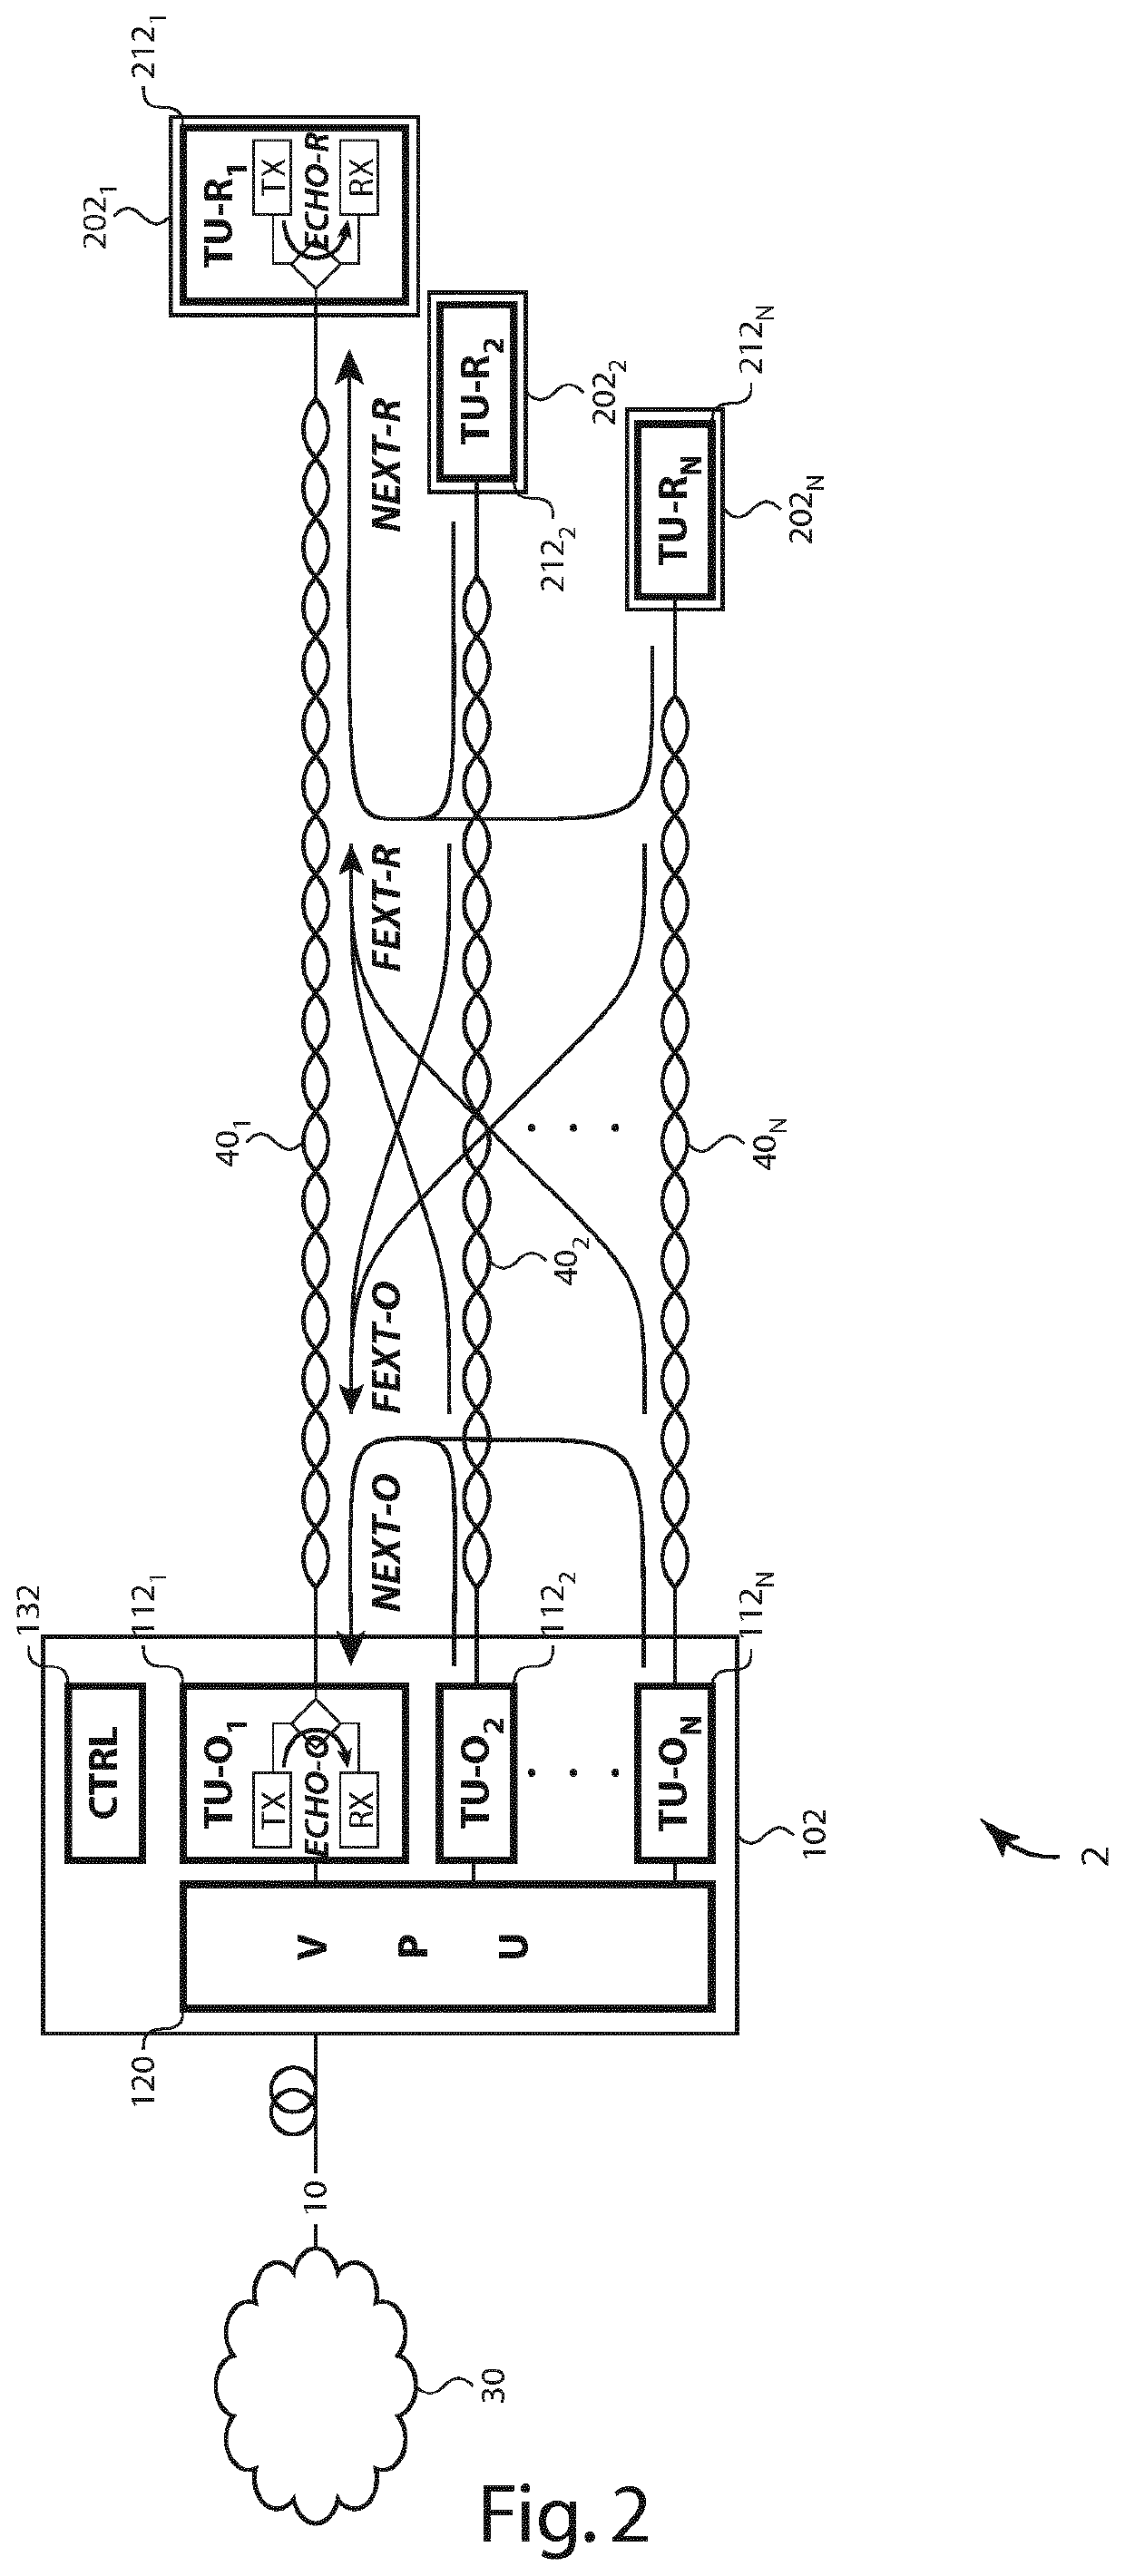 Method and Apparatus for Full-Duplex Communication over Wired Transmission Media